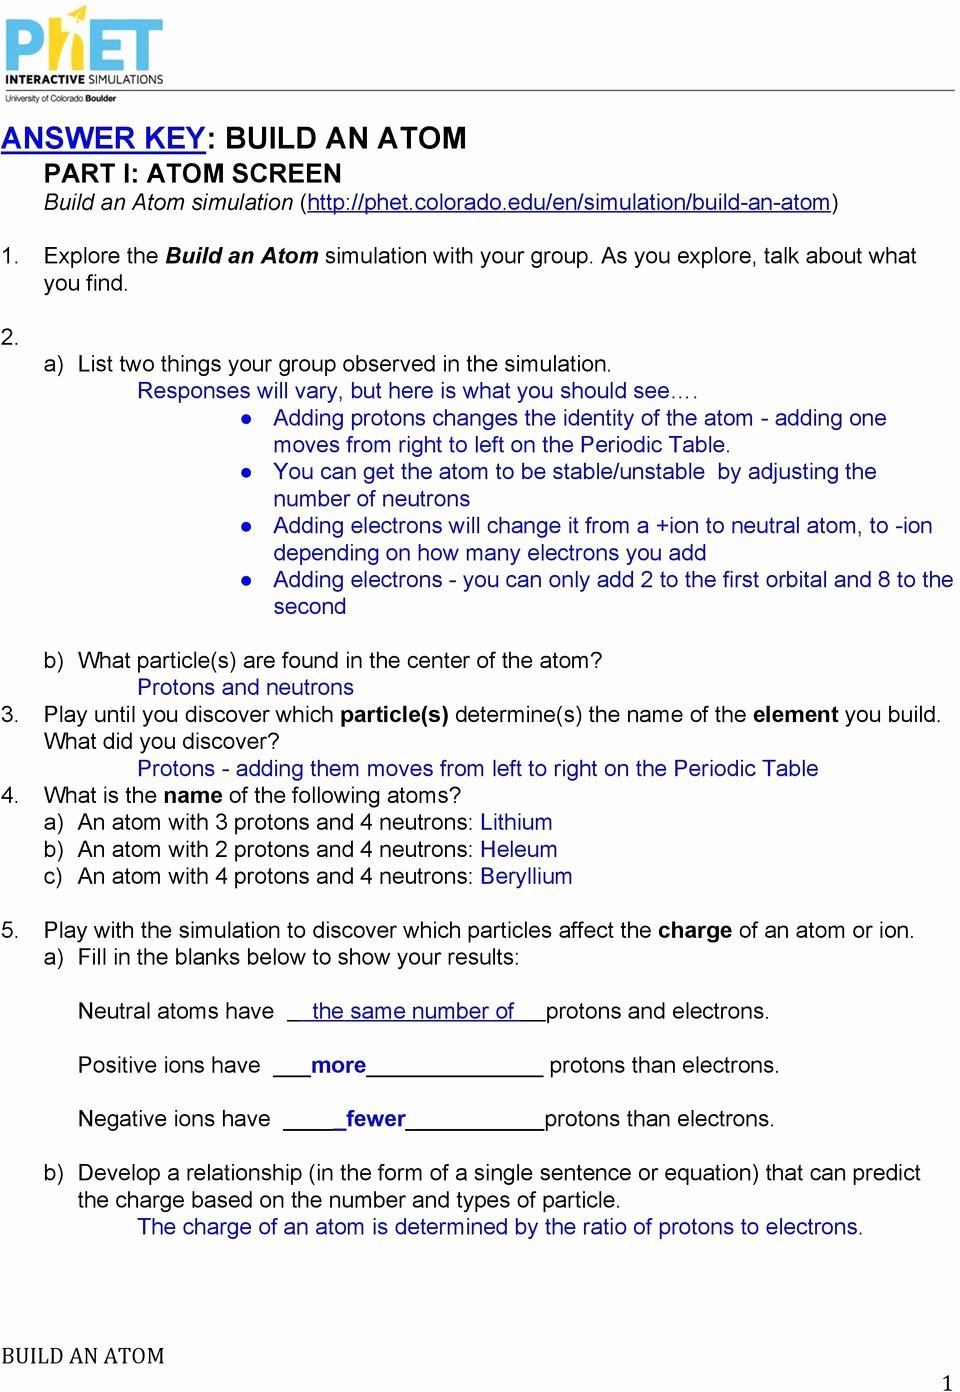 The Chemistry Of Life Worksheet Awesome Biology Chapter 2 the Chemistry Life Worksheet Answers